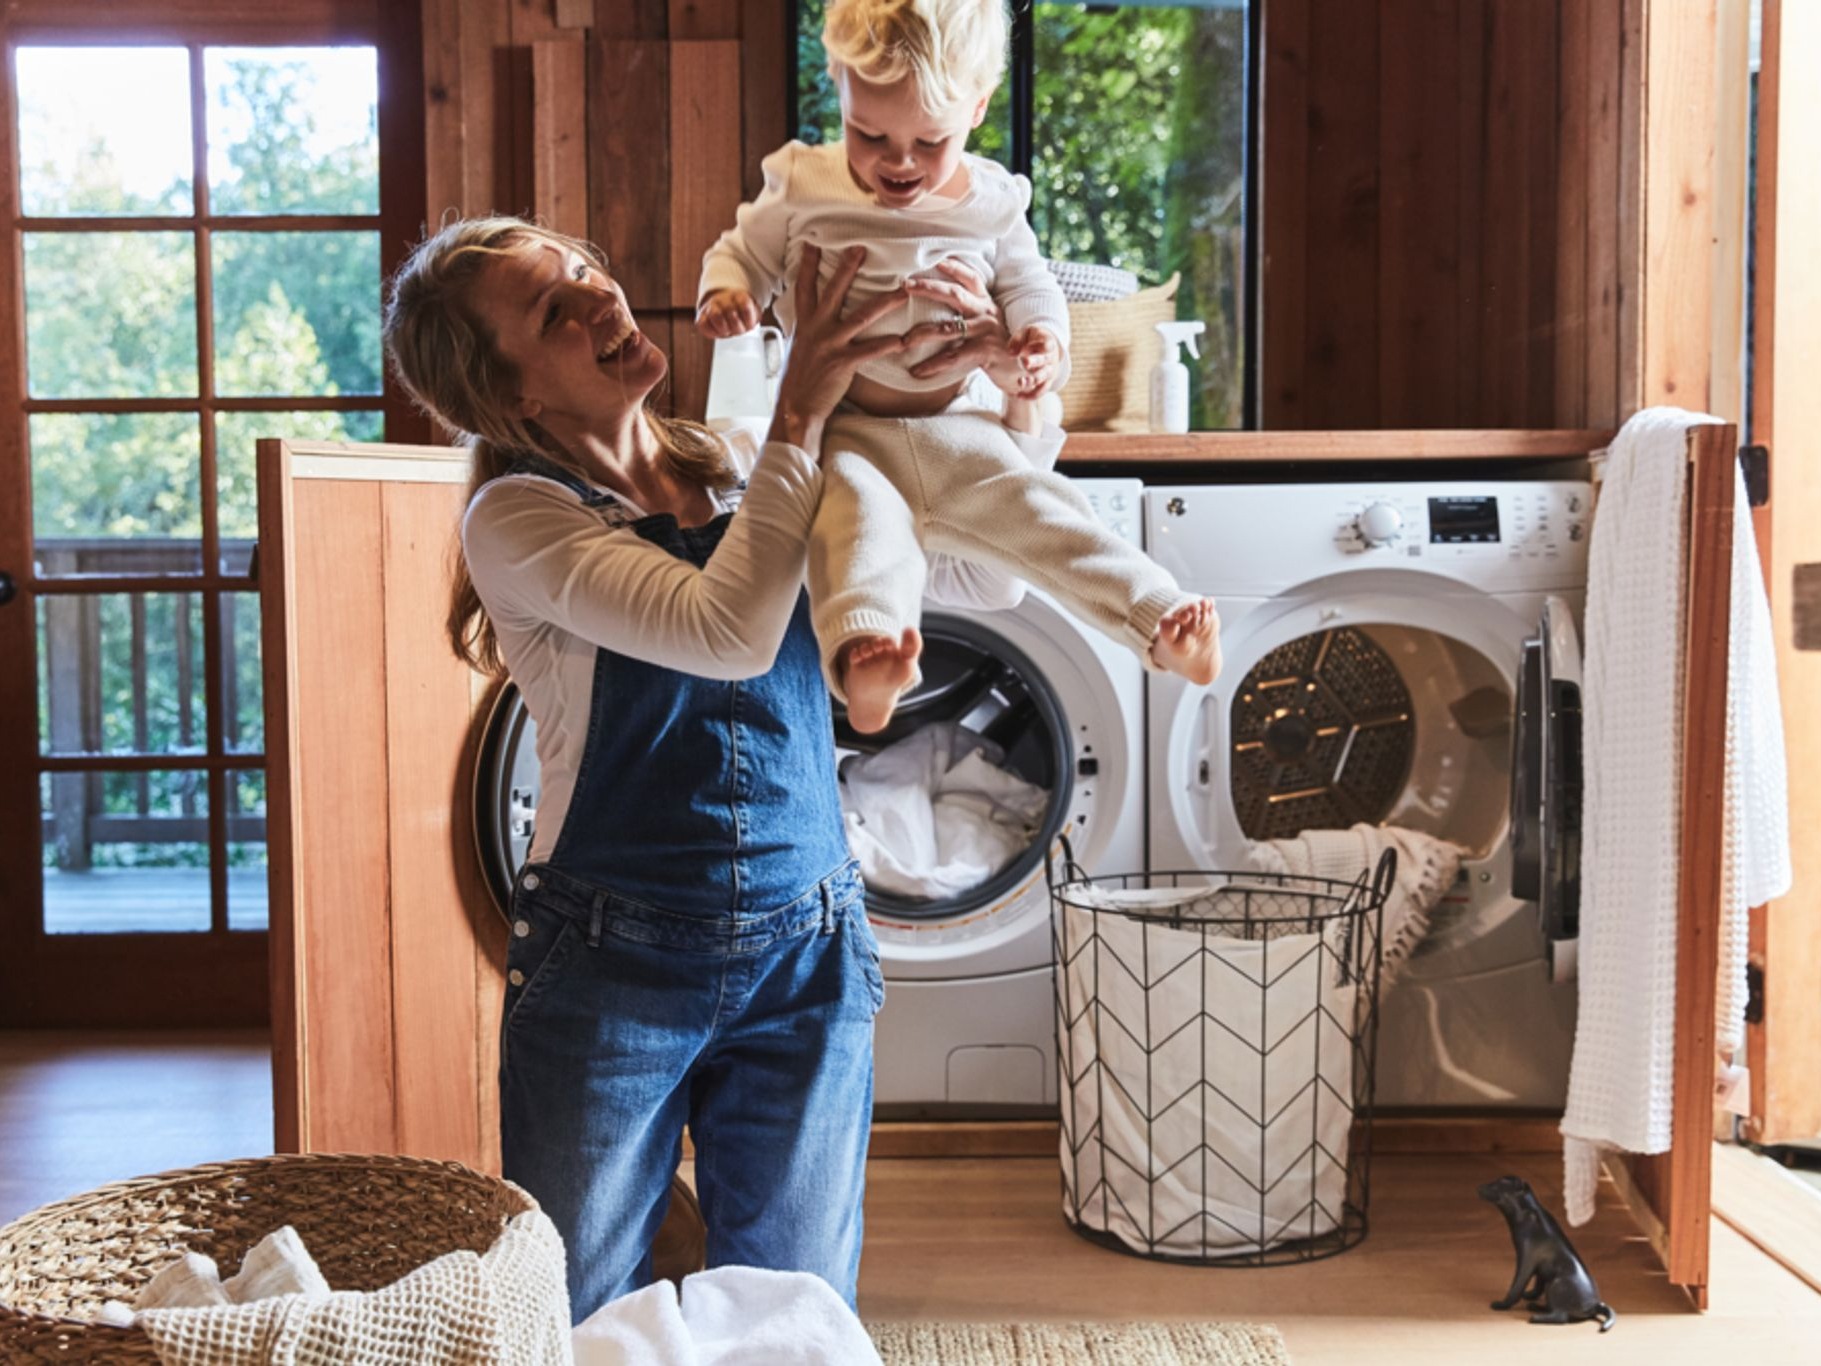 Woman holding baby in laundry room